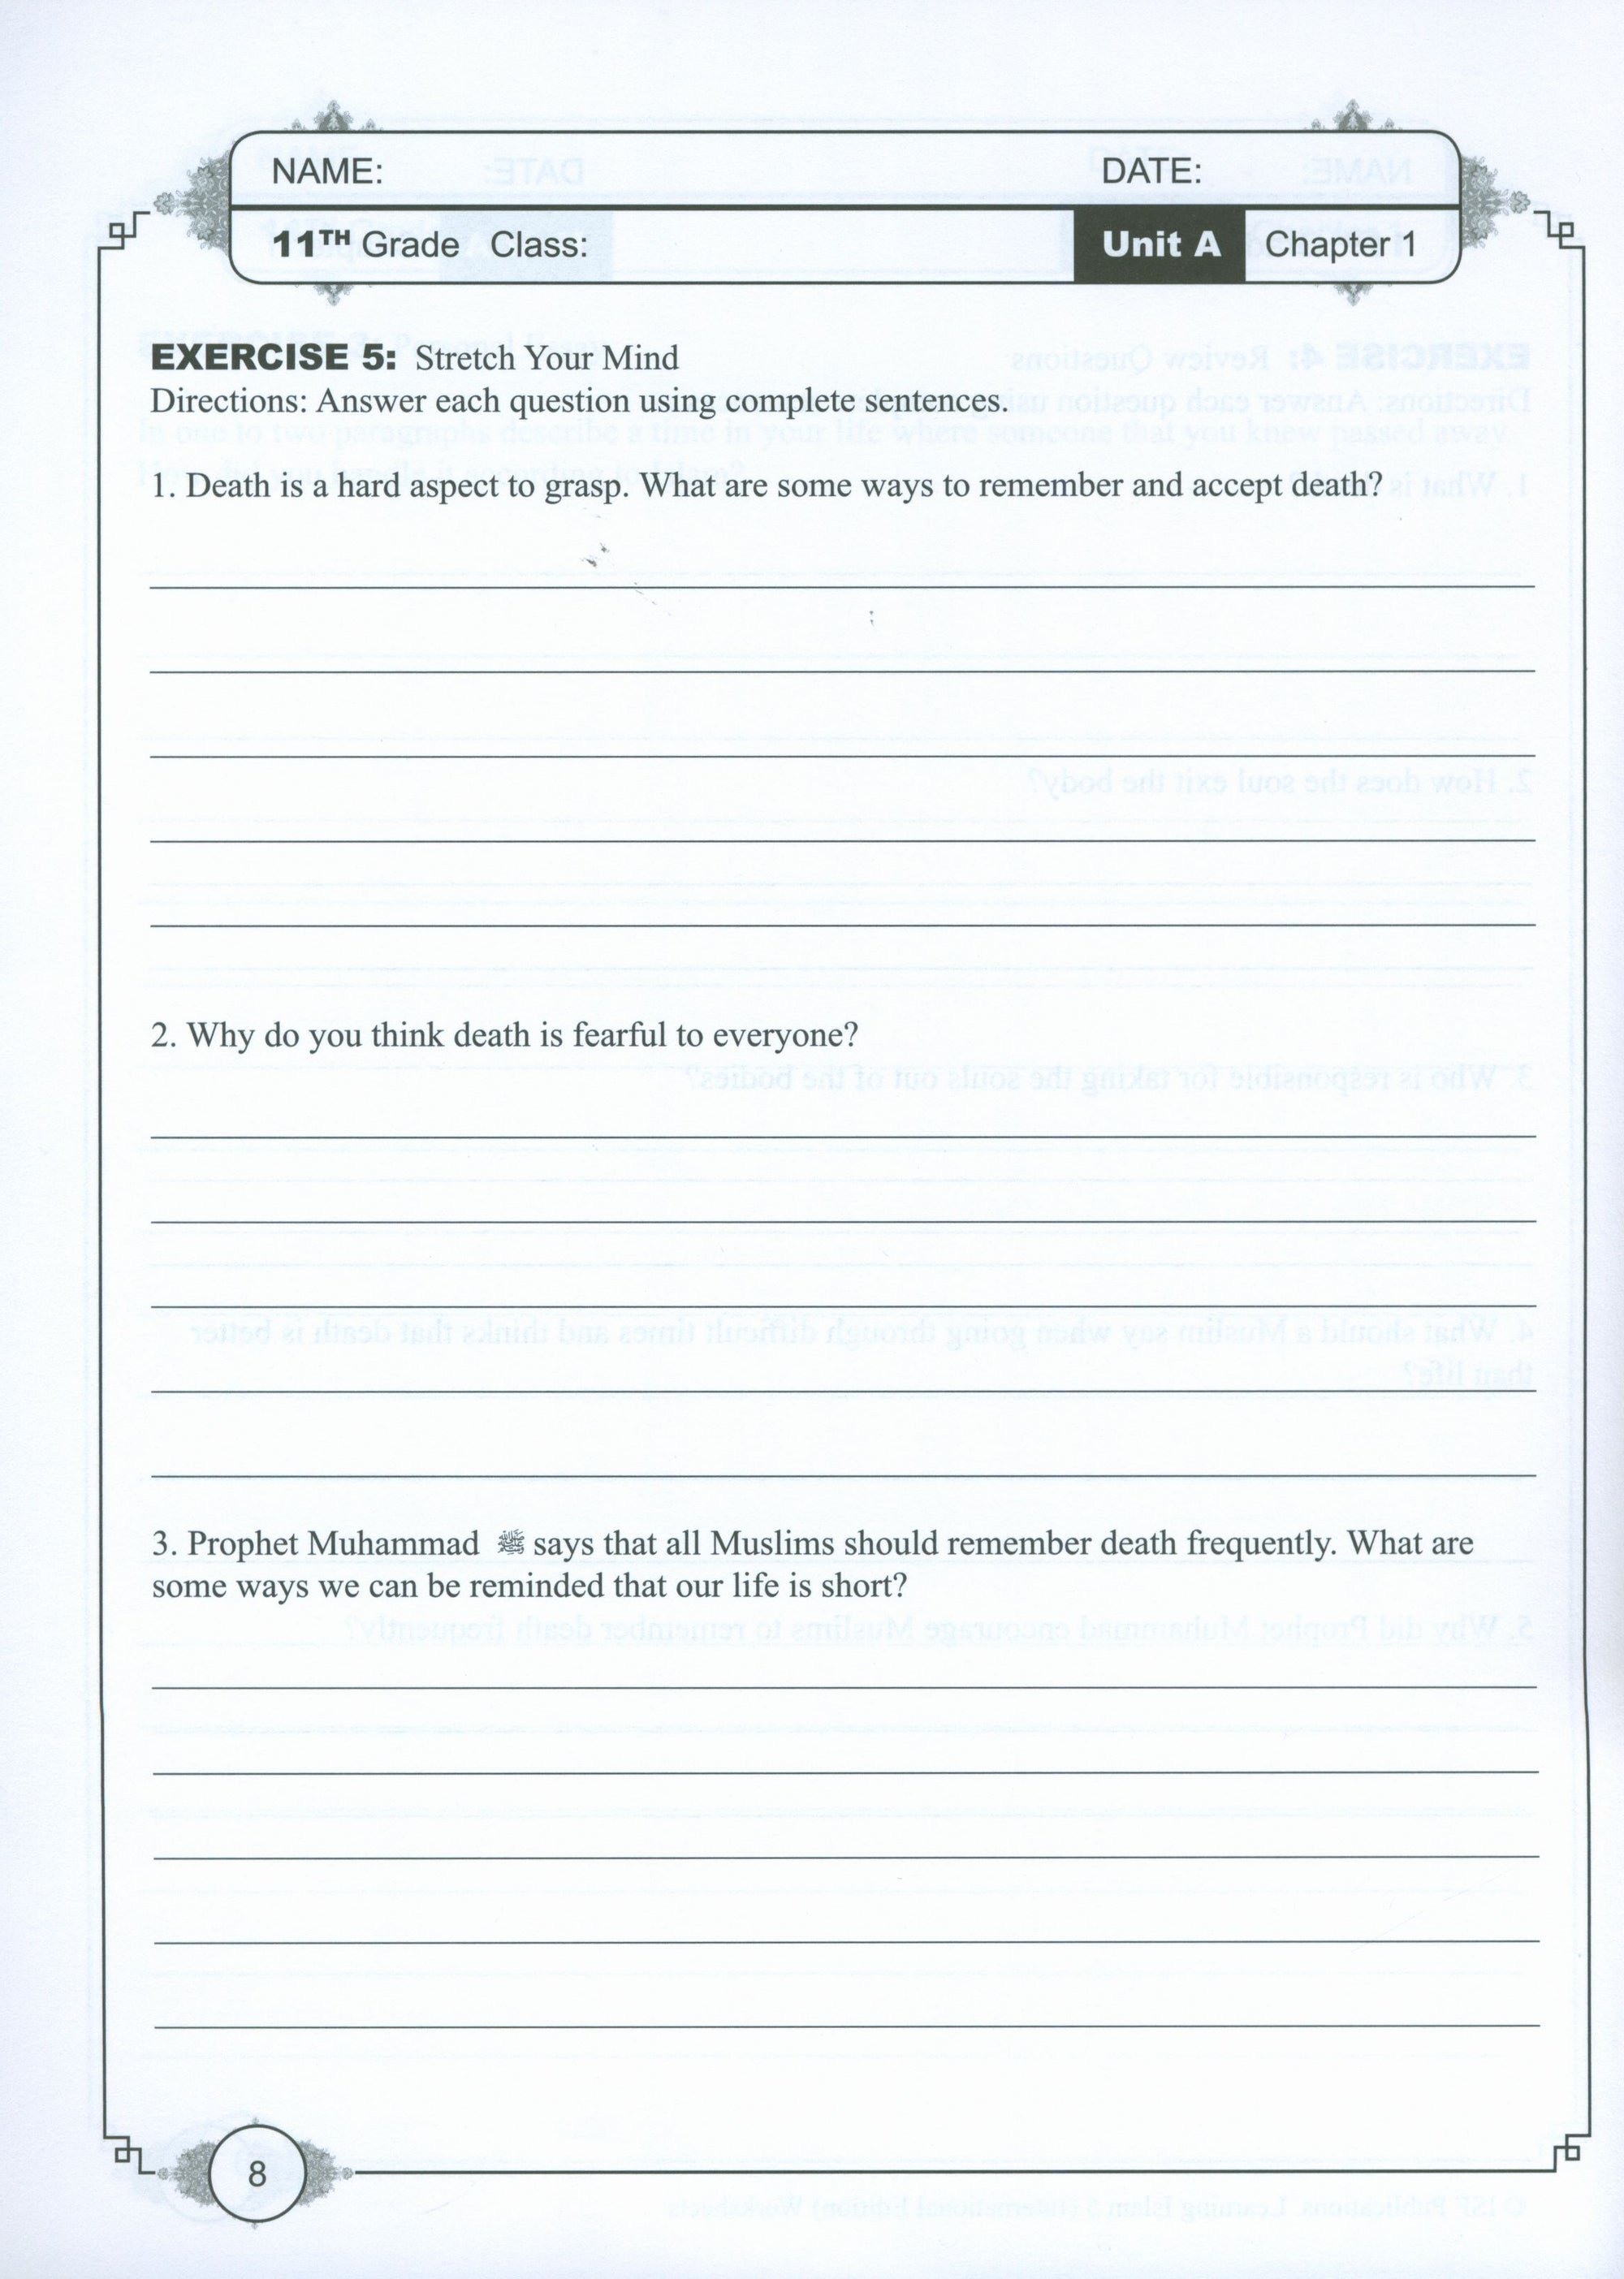 Learning Islam Weekend Edition Worksheets Level 5 (10th Grade)